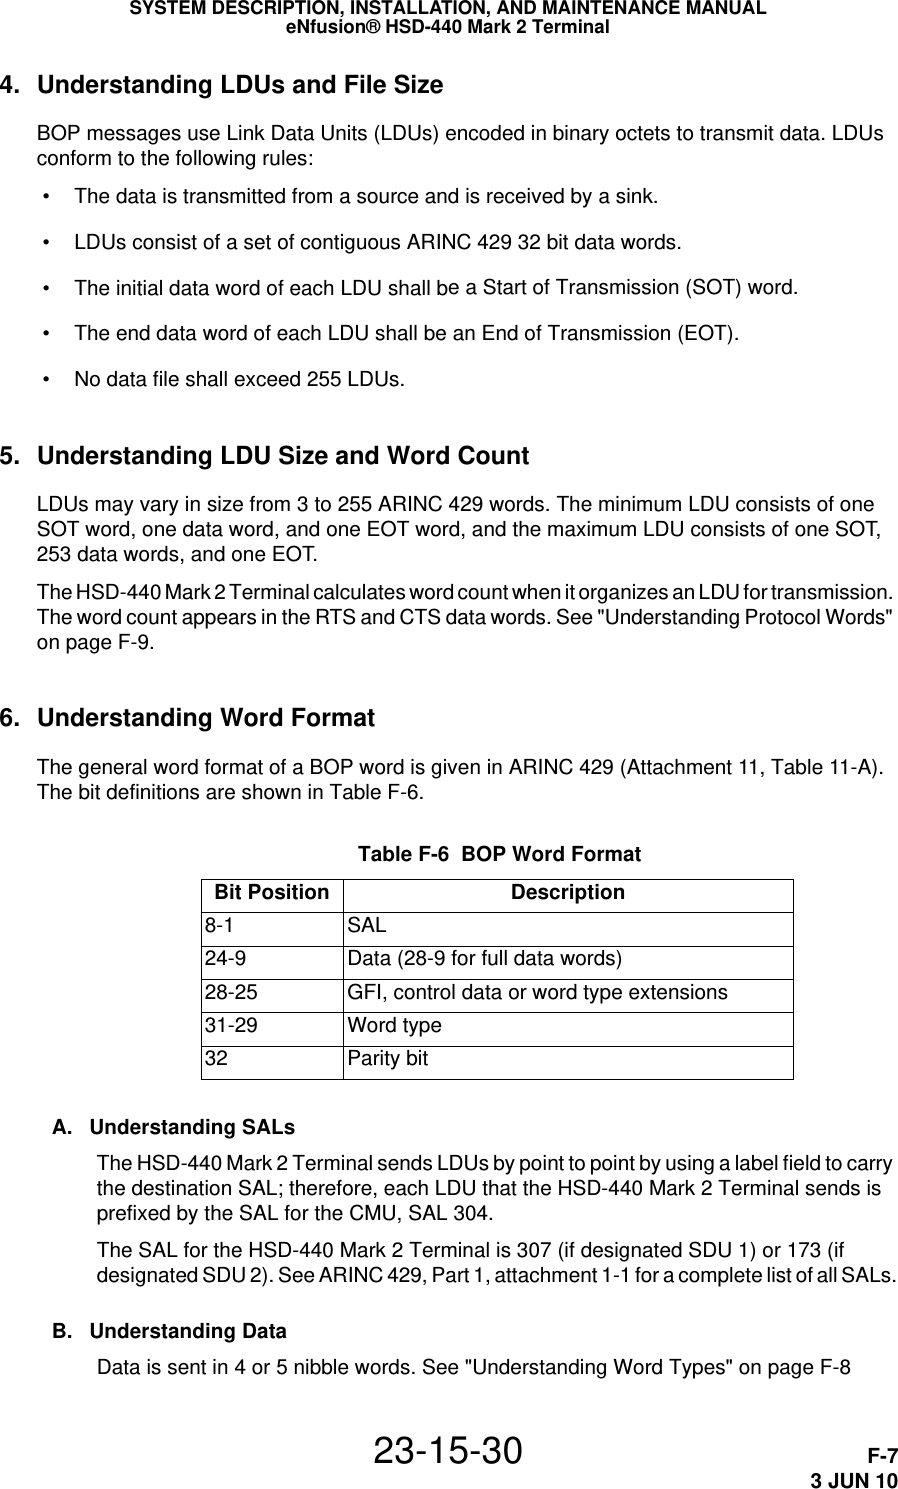 SYSTEM DESCRIPTION, INSTALLATION, AND MAINTENANCE MANUALeNfusion® HSD-440 Mark 2 Terminal23-15-30 F-73 JUN 104. Understanding LDUs and File SizeBOP messages use Link Data Units (LDUs) encoded in binary octets to transmit data. LDUs conform to the following rules: • The data is transmitted from a source and is received by a sink. • LDUs consist of a set of contiguous ARINC 429 32 bit data words. • The initial data word of each LDU shall be a Start of Transmission (SOT) word. • The end data word of each LDU shall be an End of Transmission (EOT). • No data file shall exceed 255 LDUs.5. Understanding LDU Size and Word CountLDUs may vary in size from 3 to 255 ARINC 429 words. The minimum LDU consists of one SOT word, one data word, and one EOT word, and the maximum LDU consists of one SOT, 253 data words, and one EOT. The HSD-440 Mark 2 Terminal calculates word count when it organizes an LDU for transmission. The word count appears in the RTS and CTS data words. See &quot;Understanding Protocol Words&quot; on page F-9.6. Understanding Word FormatThe general word format of a BOP word is given in ARINC 429 (Attachment 11, Table 11-A). The bit definitions are shown in Table F-6. Table F-6  BOP Word Format Bit Position Description8-1 SAL24-9 Data (28-9 for full data words)28-25 GFI, control data or word type extensions31-29 Word type32 Parity bitA. Understanding SALsThe HSD-440 Mark 2 Terminal sends LDUs by point to point by using a label field to carry the destination SAL; therefore, each LDU that the HSD-440 Mark 2 Terminal sends is prefixed by the SAL for the CMU, SAL 304. The SAL for the HSD-440 Mark 2 Terminal is 307 (if designated SDU 1) or 173 (if designated SDU 2). See ARINC 429, Part 1, attachment 1-1 for a complete list of all SALs.B. Understanding DataData is sent in 4 or 5 nibble words. See &quot;Understanding Word Types&quot; on page F-8